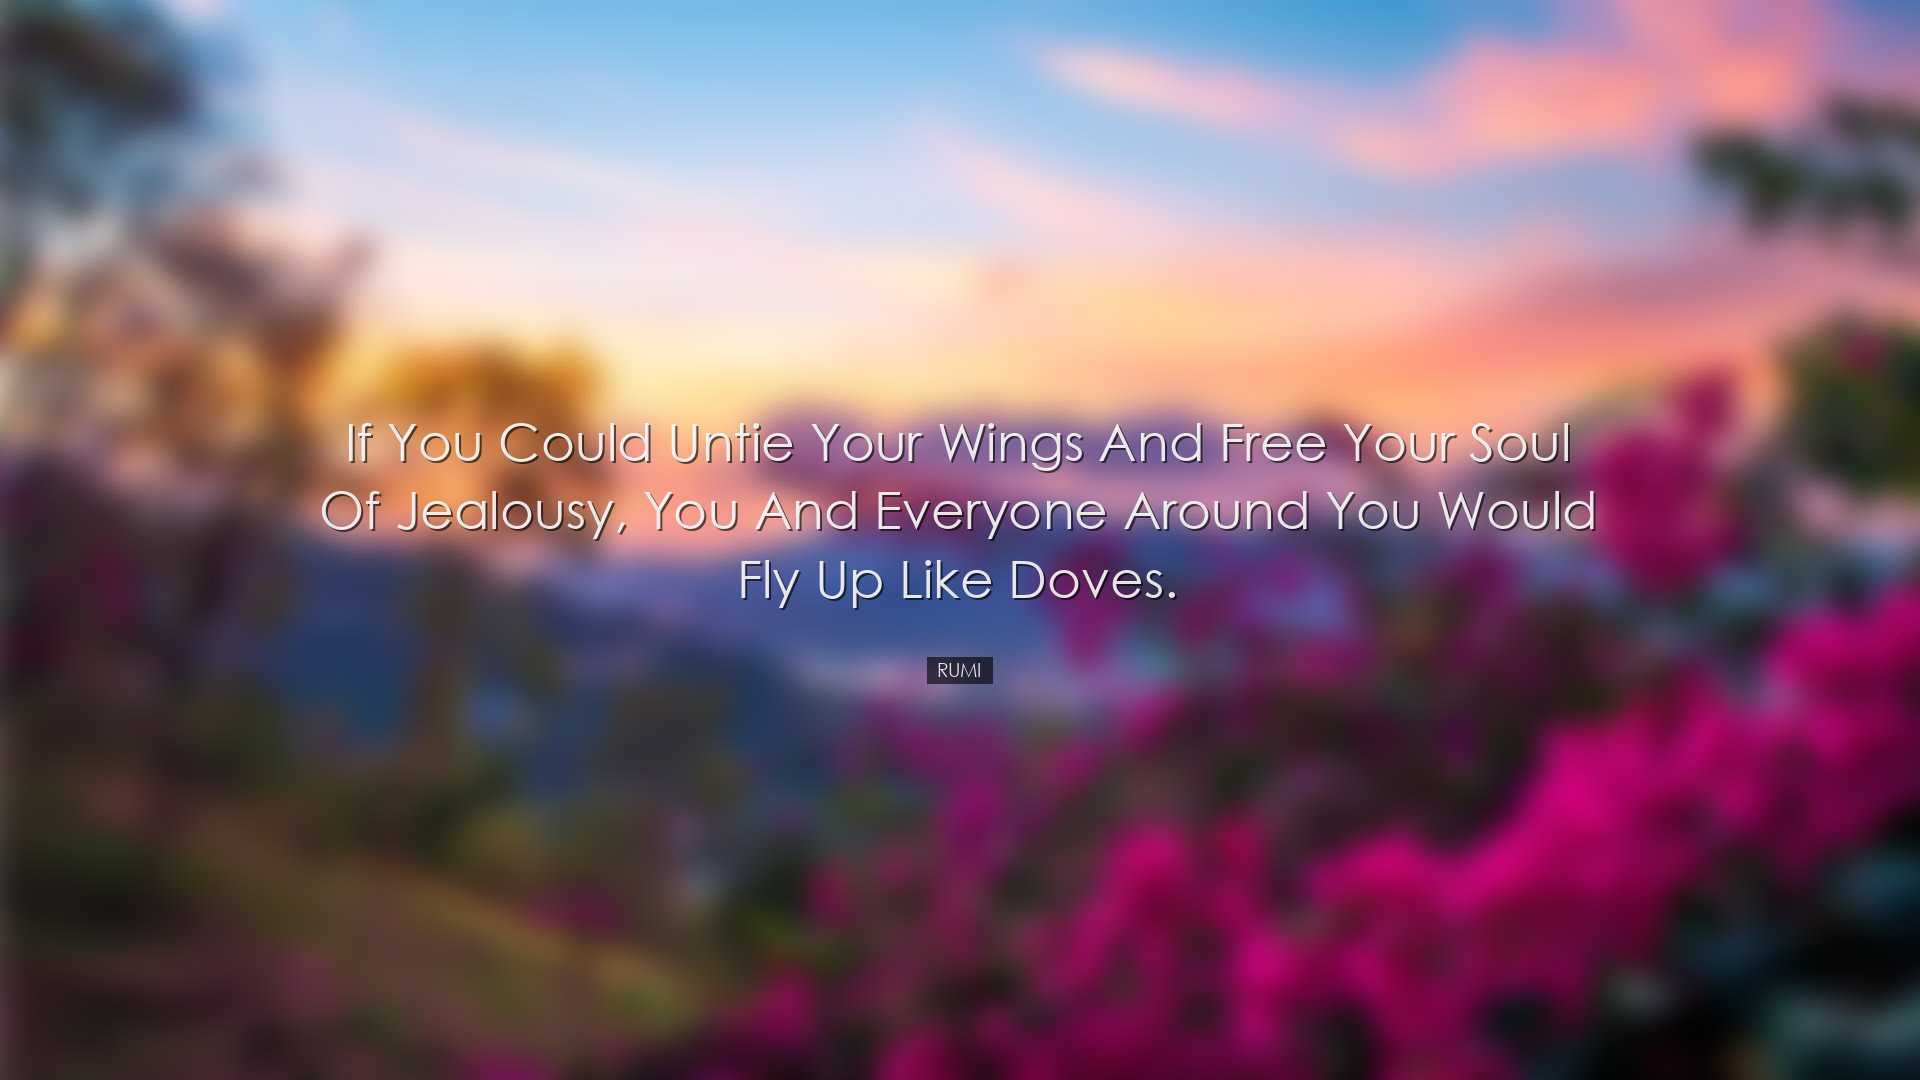 If you could untie your wings and free your soul of jealousy, you